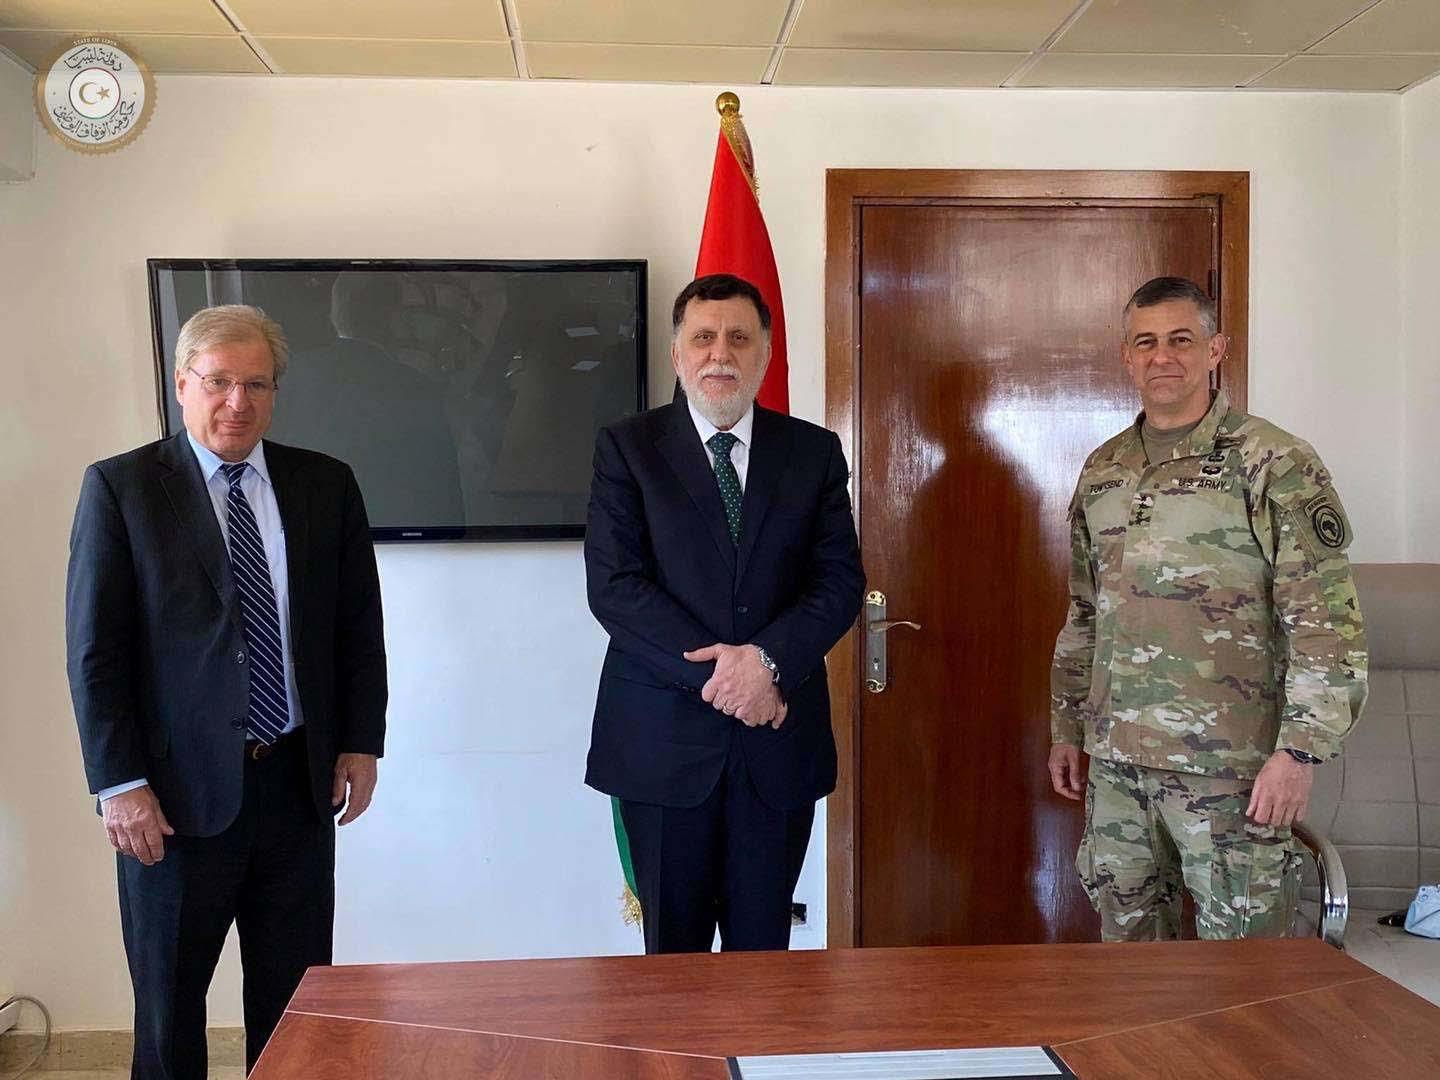 Prime Minister Fayez al-Sarraj meets with the US Ambassador to Libya, Richard Norland and commander of AFRICOM Gen. Stephen Townsend